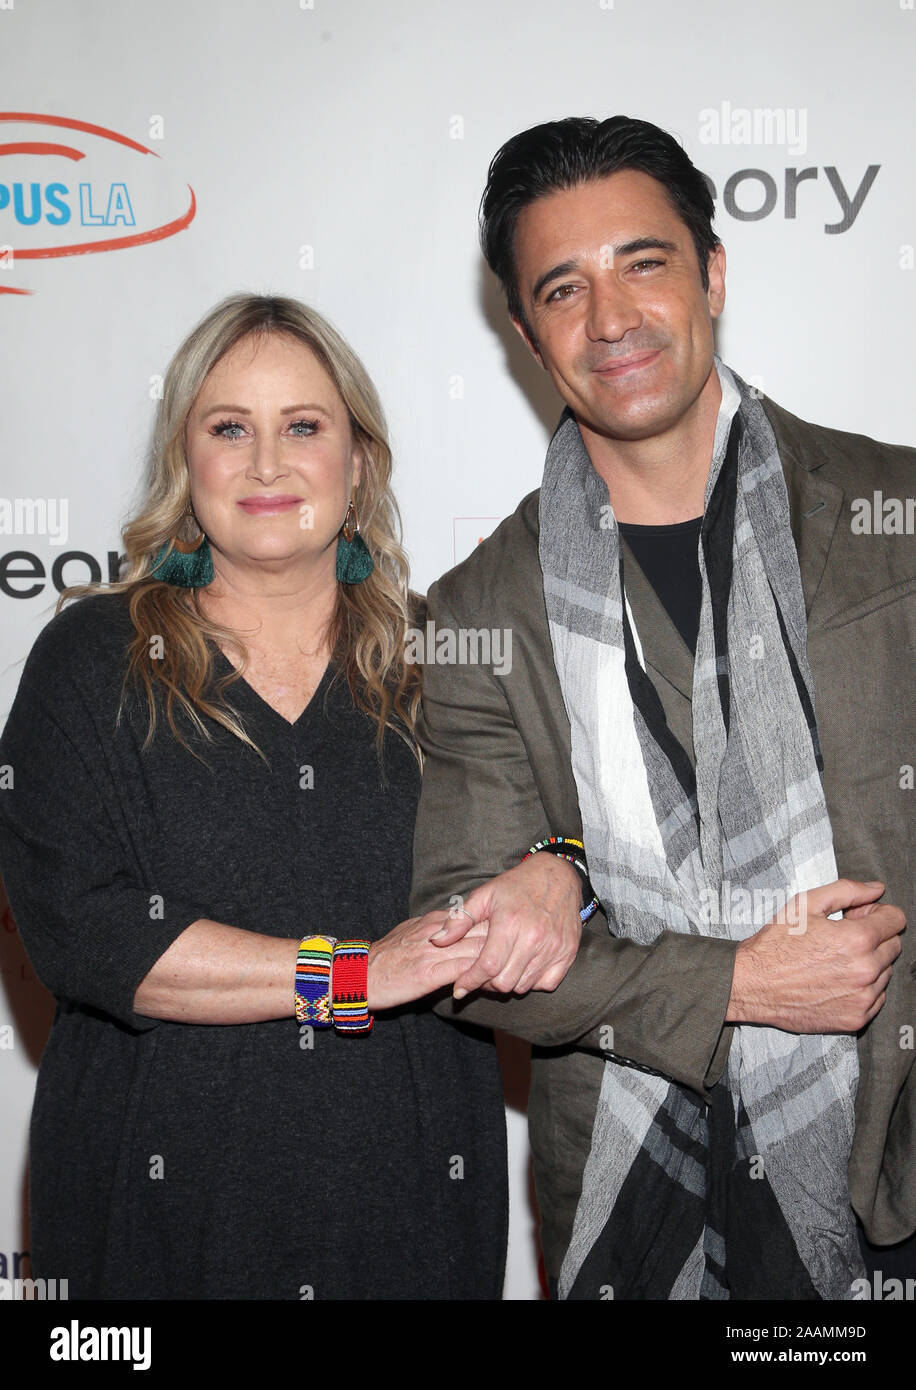 Beverly Hills, Ca. 22nd Nov, 2019. Kelly Stone, Gilles Marini, at the Lupus LA Hollywood Bag Ladies Luncheon Honoring Dr. Sheila Barbarino at the Beverly Hilton in Beverly Hills, California on November 22, 2019 Credit: Faye Sadou/Media Punch/Alamy Live News Stock Photo